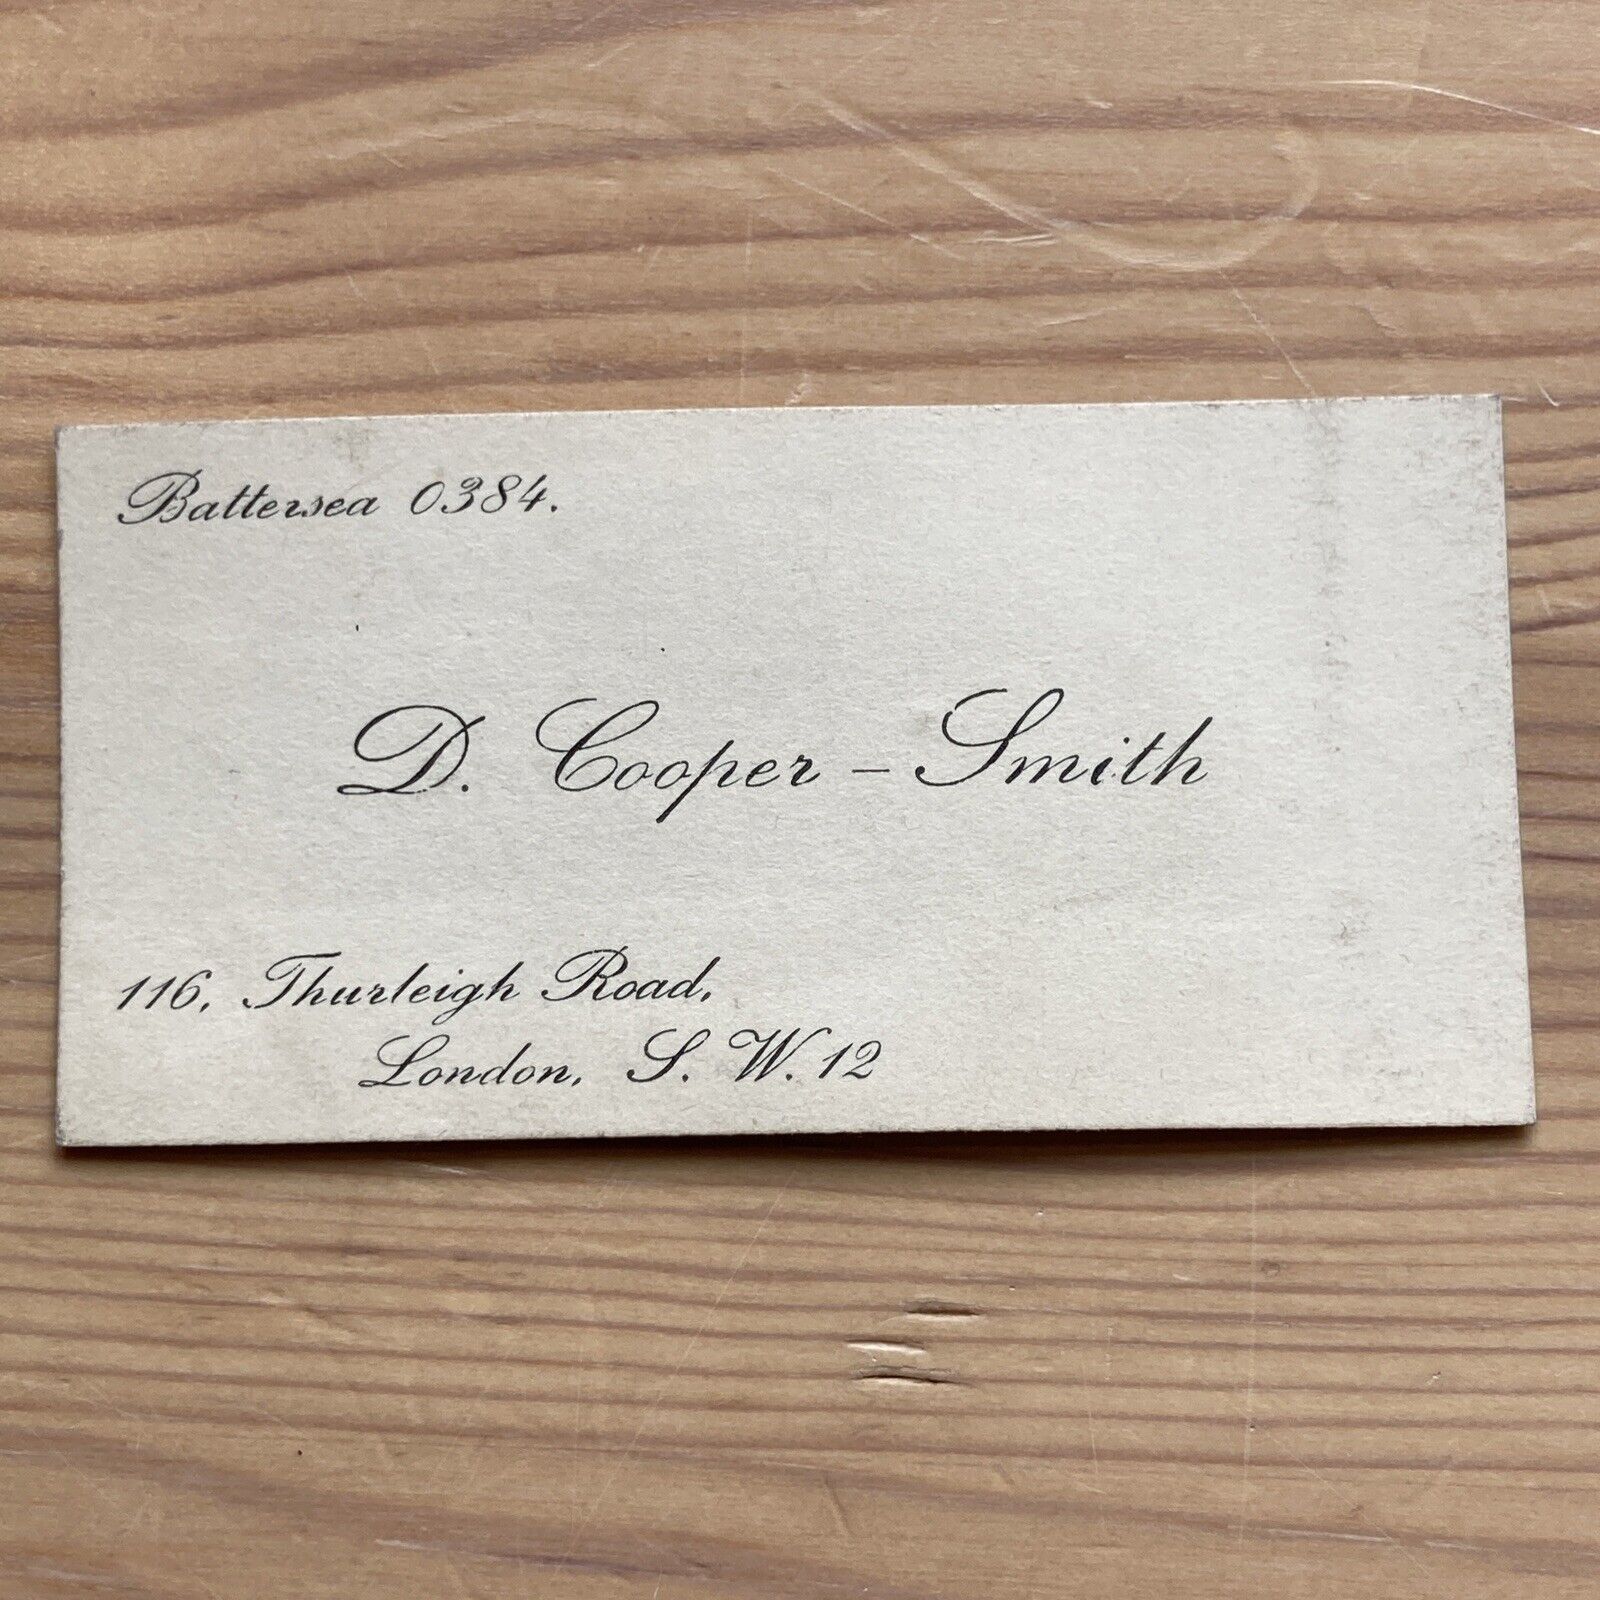 Early 20th c. Calling Card - D. Cooper-Smith of Thurleigh Road, London 